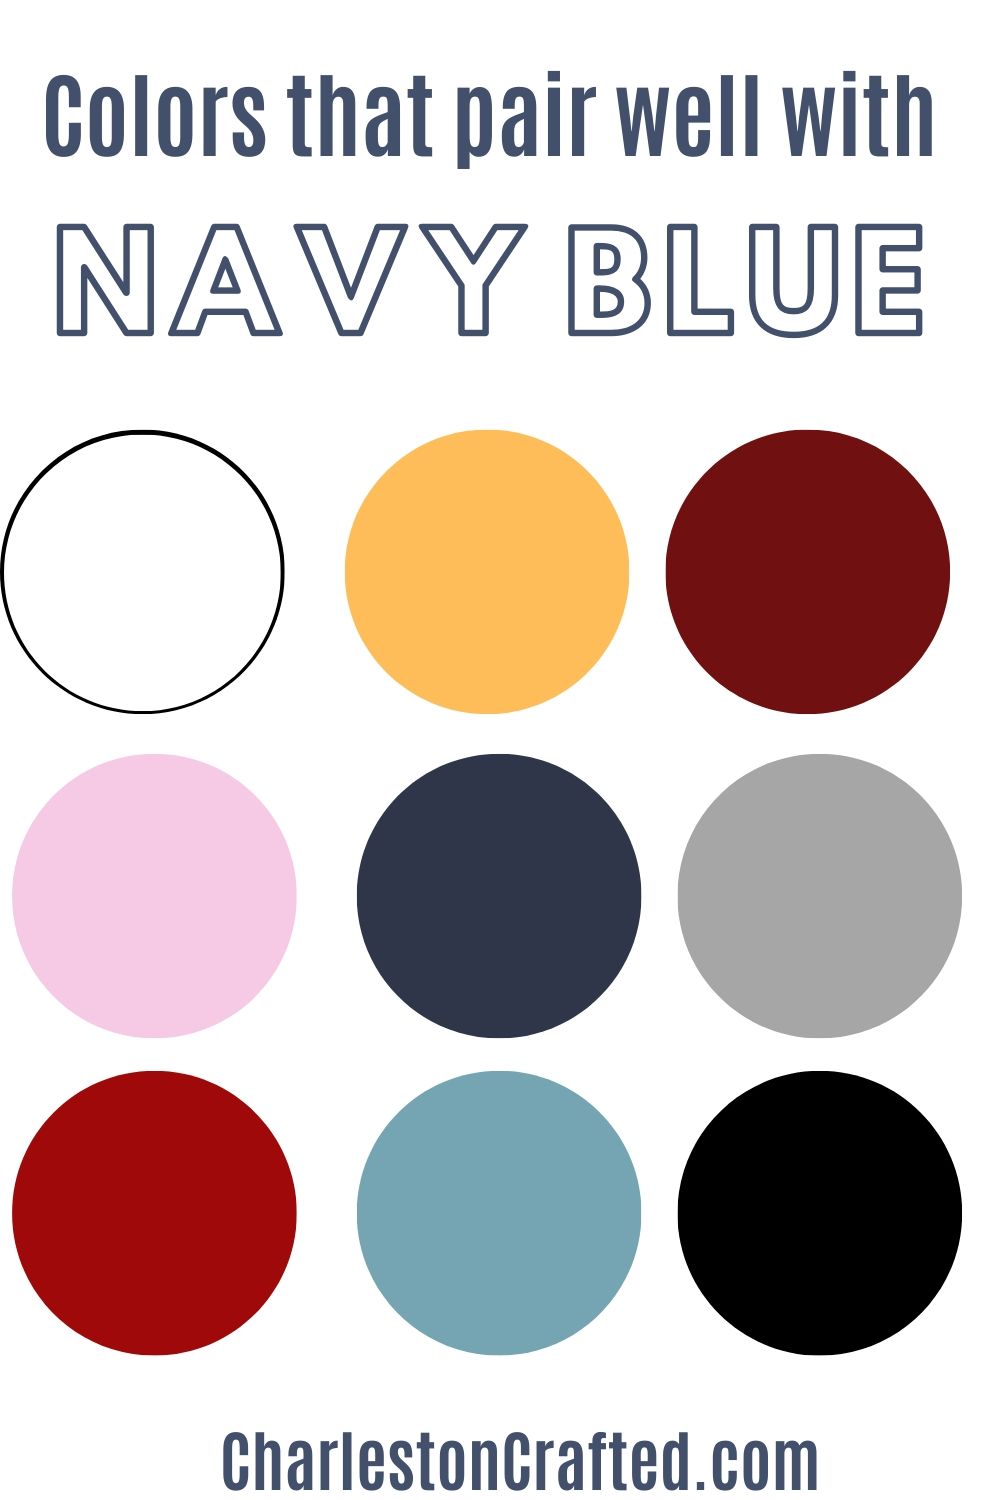 What Is Navy And What Colours Work Well With It Inside Out Style | My ...